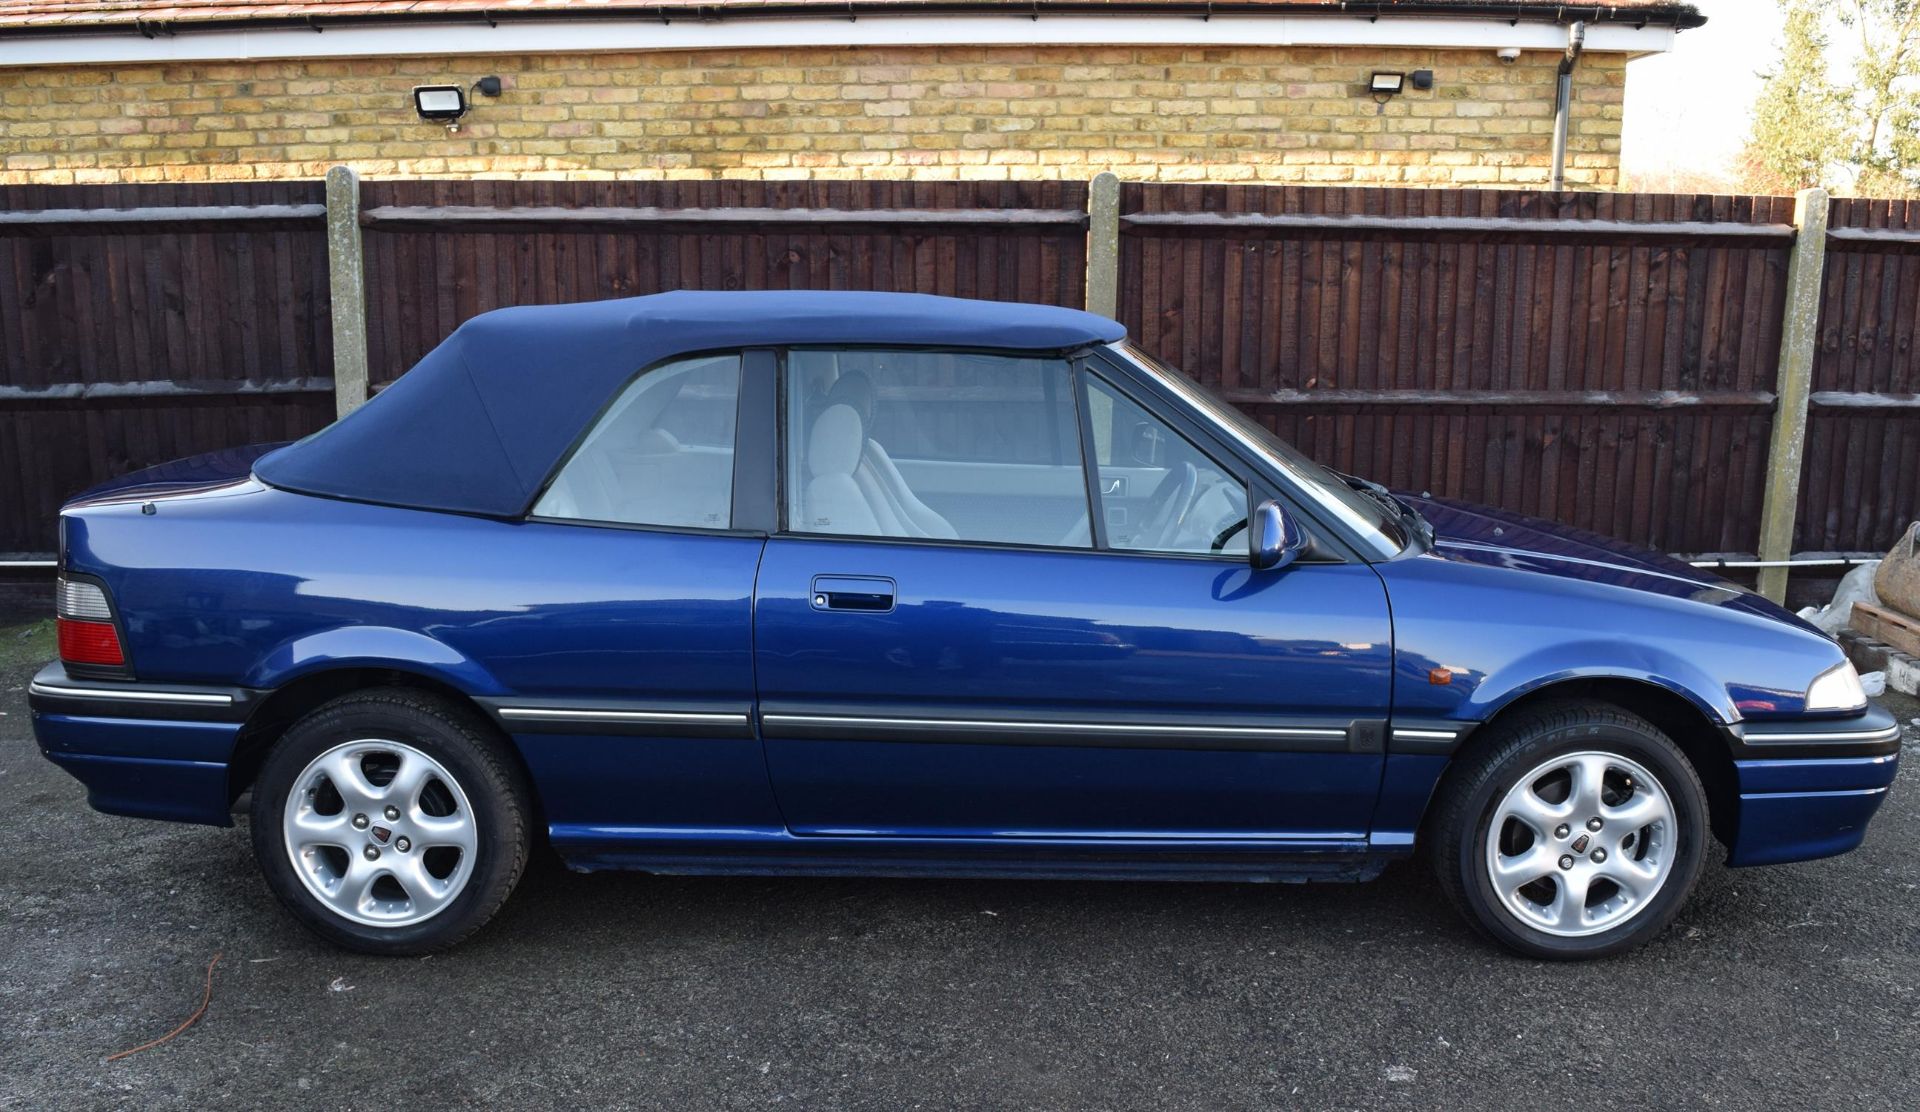 1996 Rover 216 Cabriolet - Image 6 of 25